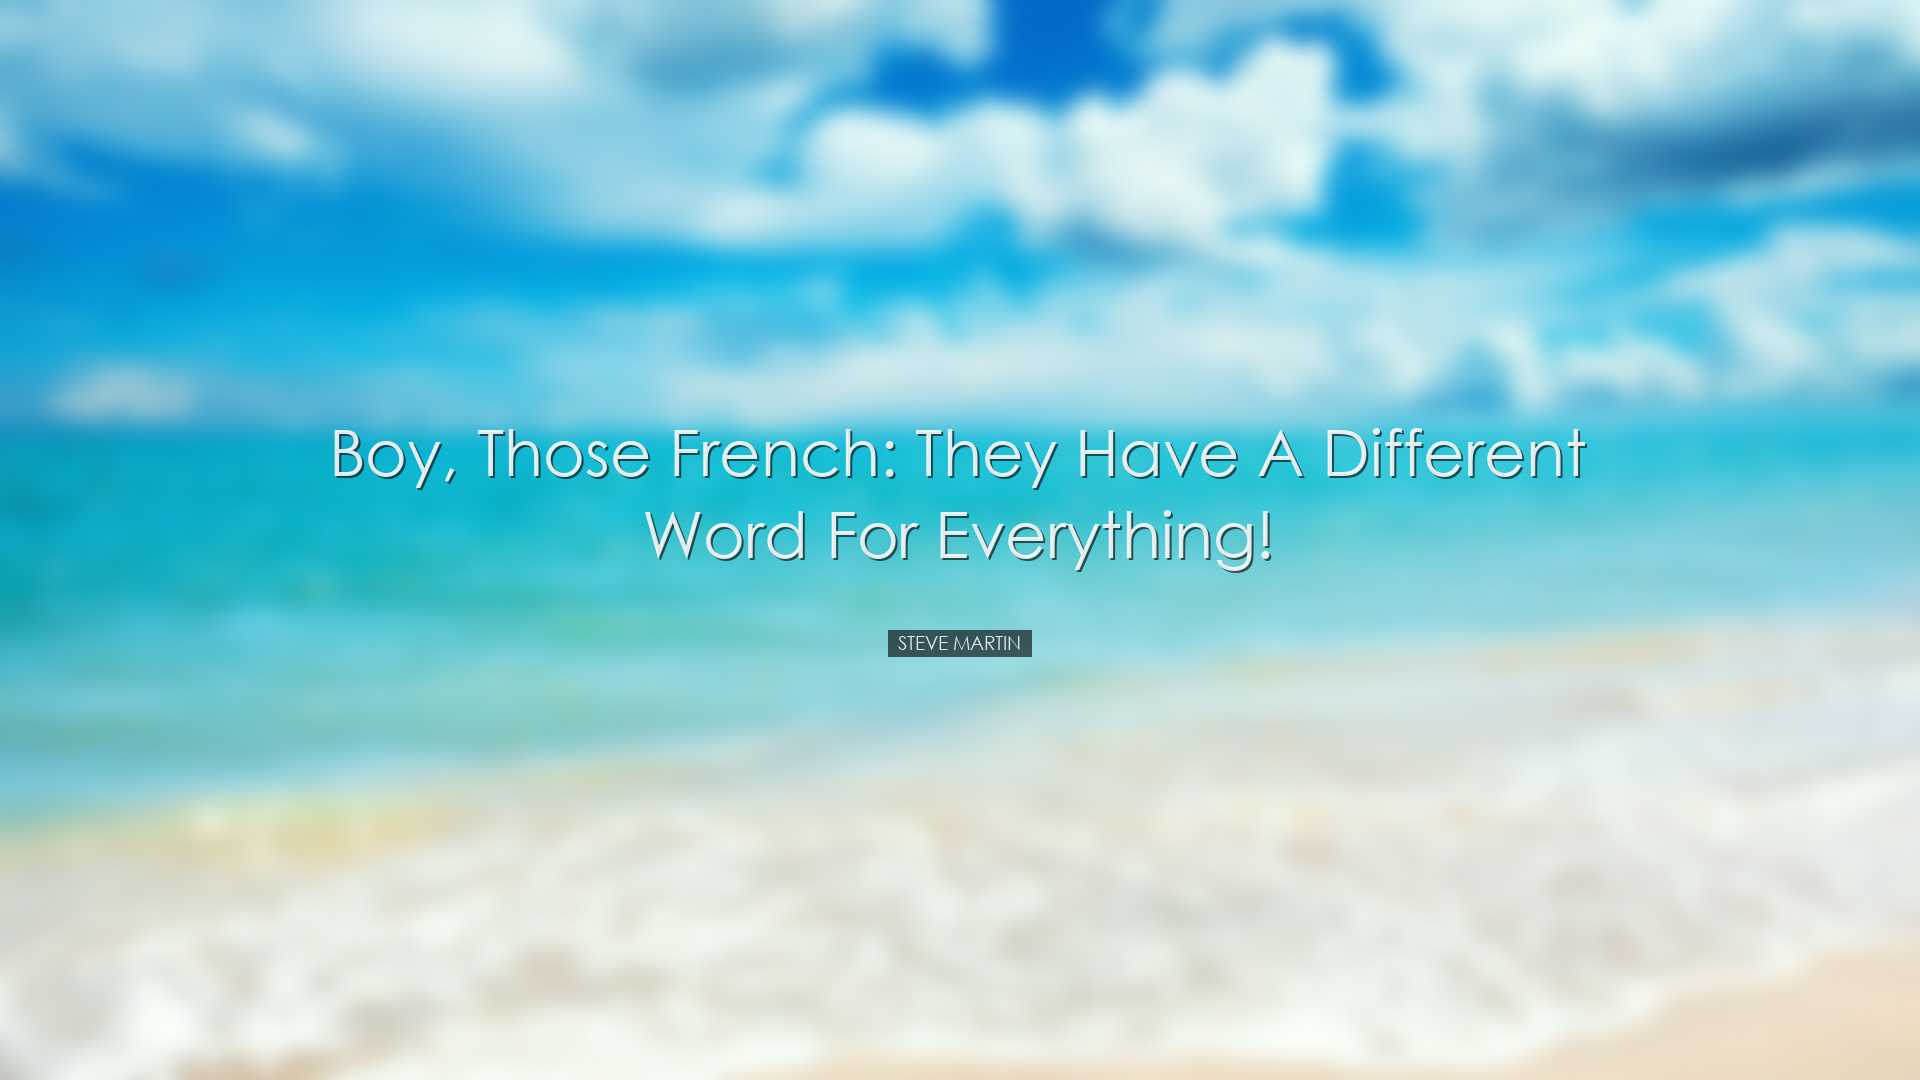 Boy, those French: they have a different word for everything! - St